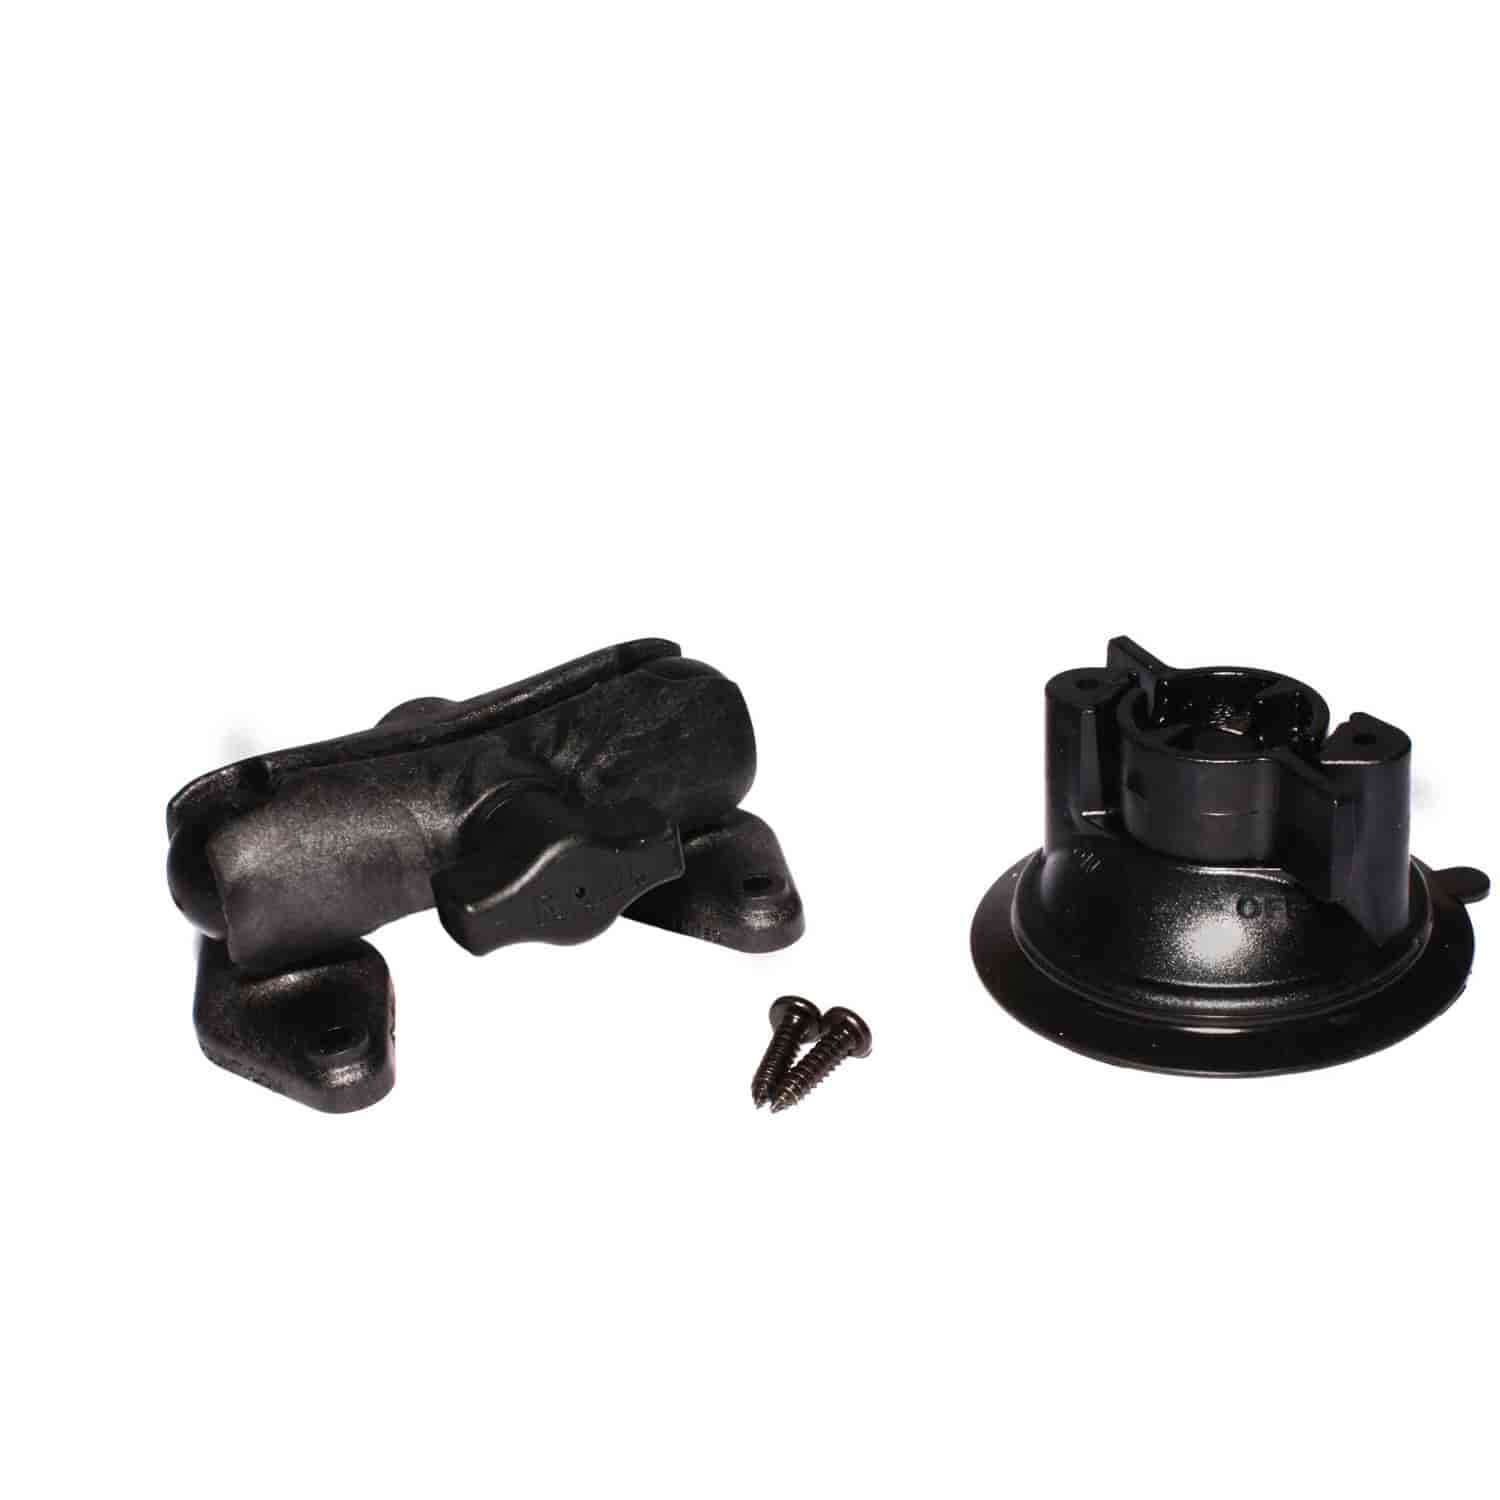 Air/Fuel Meter Suction Cup Mount